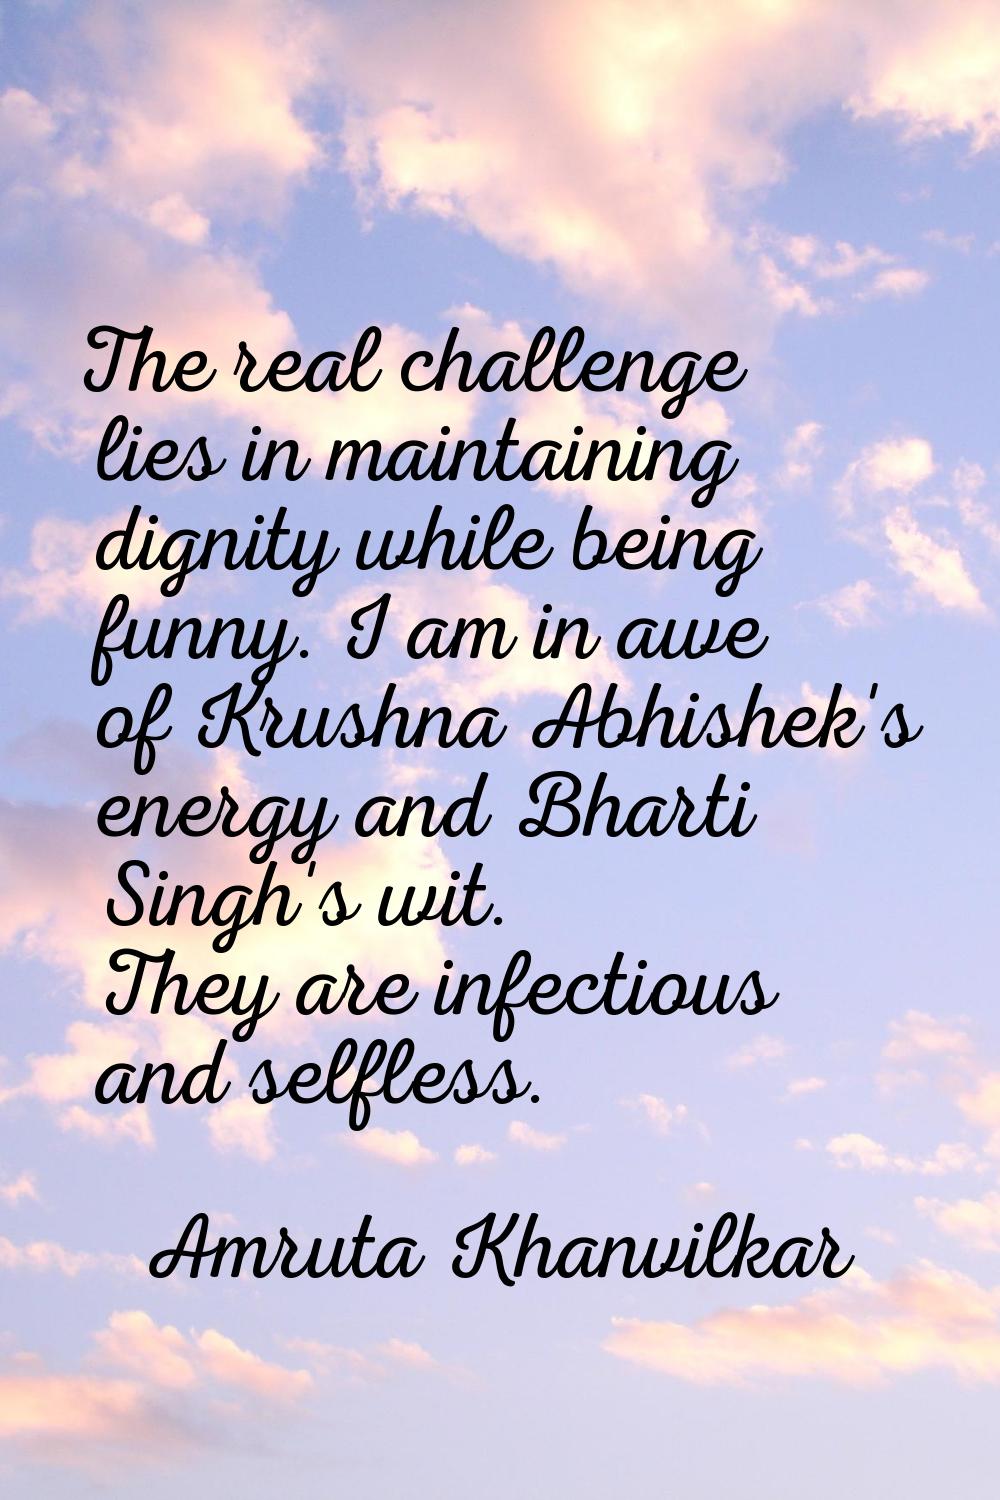 The real challenge lies in maintaining dignity while being funny. I am in awe of Krushna Abhishek's